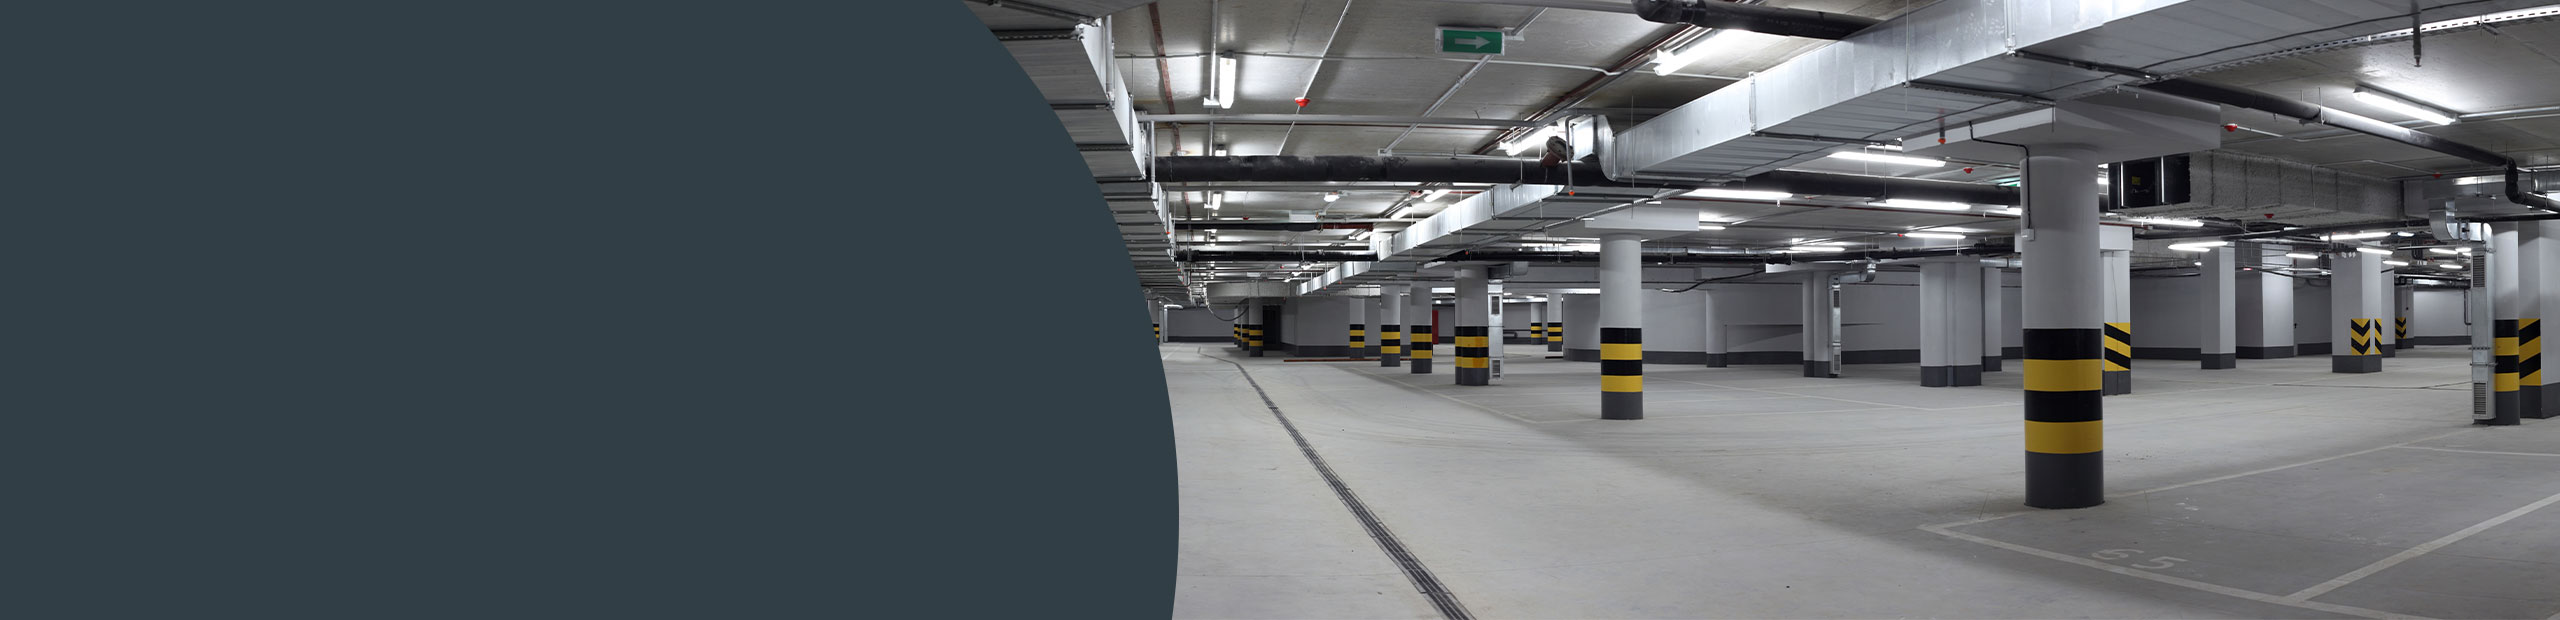 Car Park Cleaning Service - Liverpool